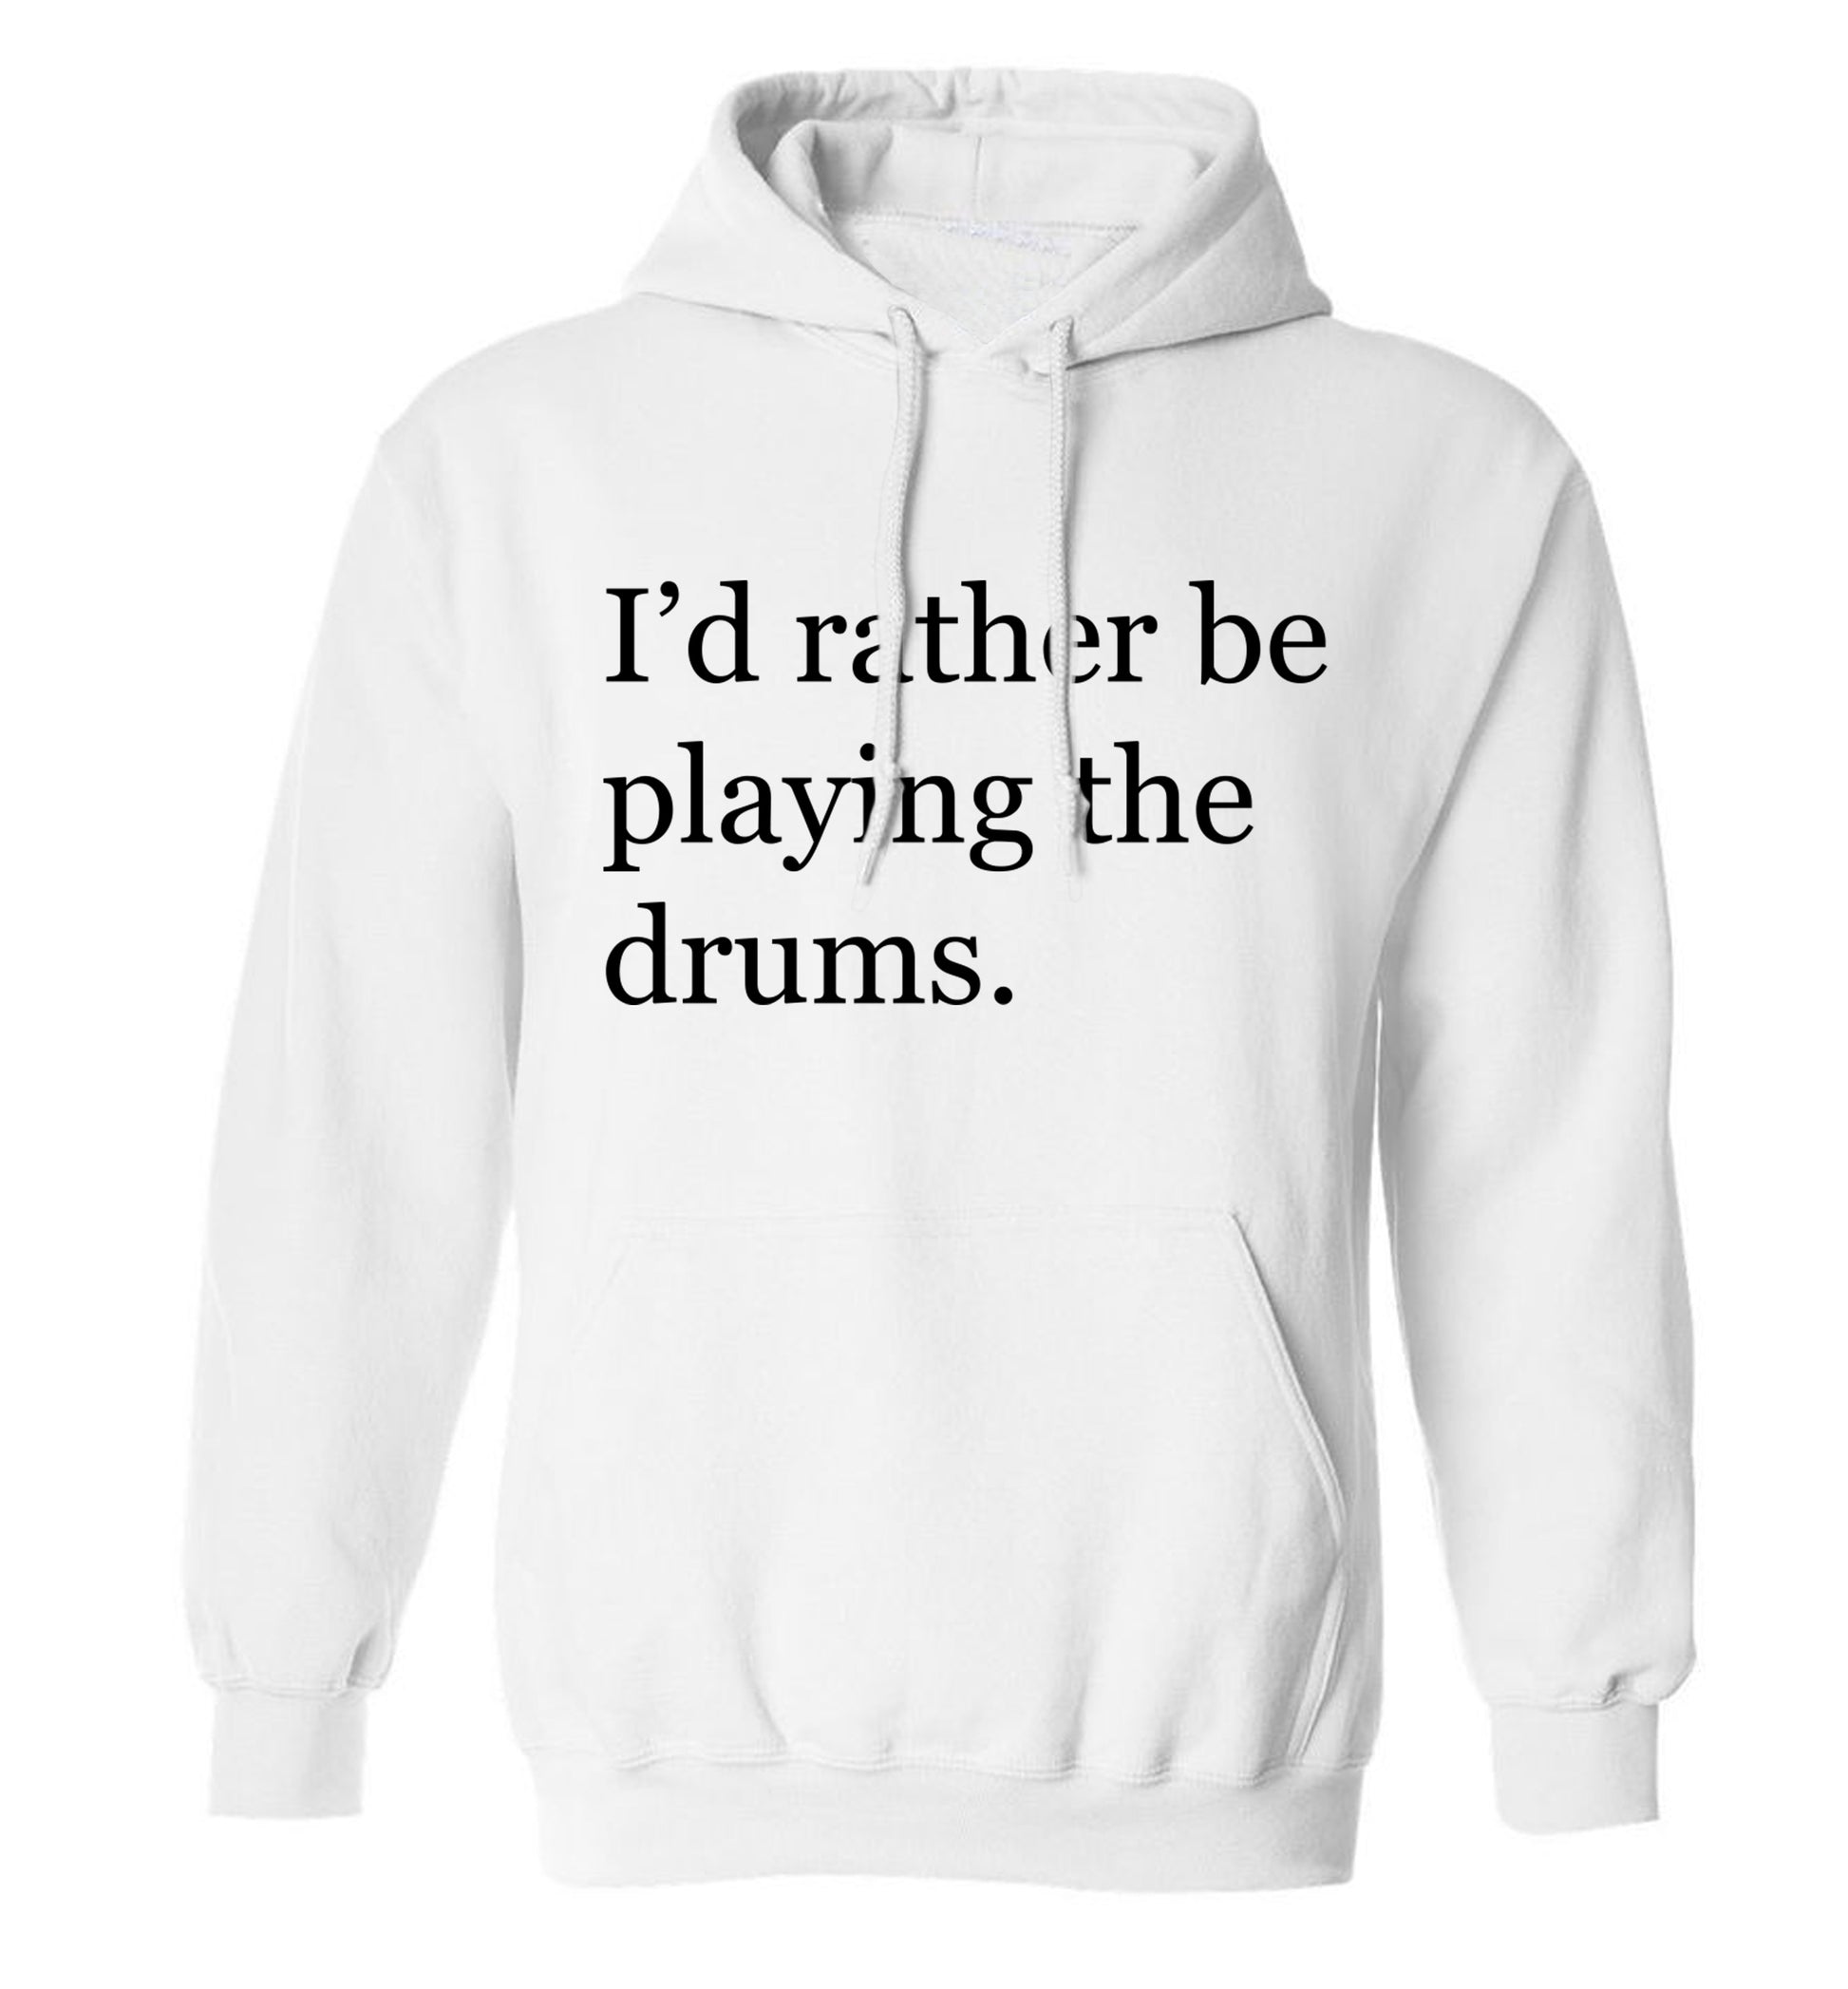 I'd rather be playing the drums adults unisexwhite hoodie 2XL